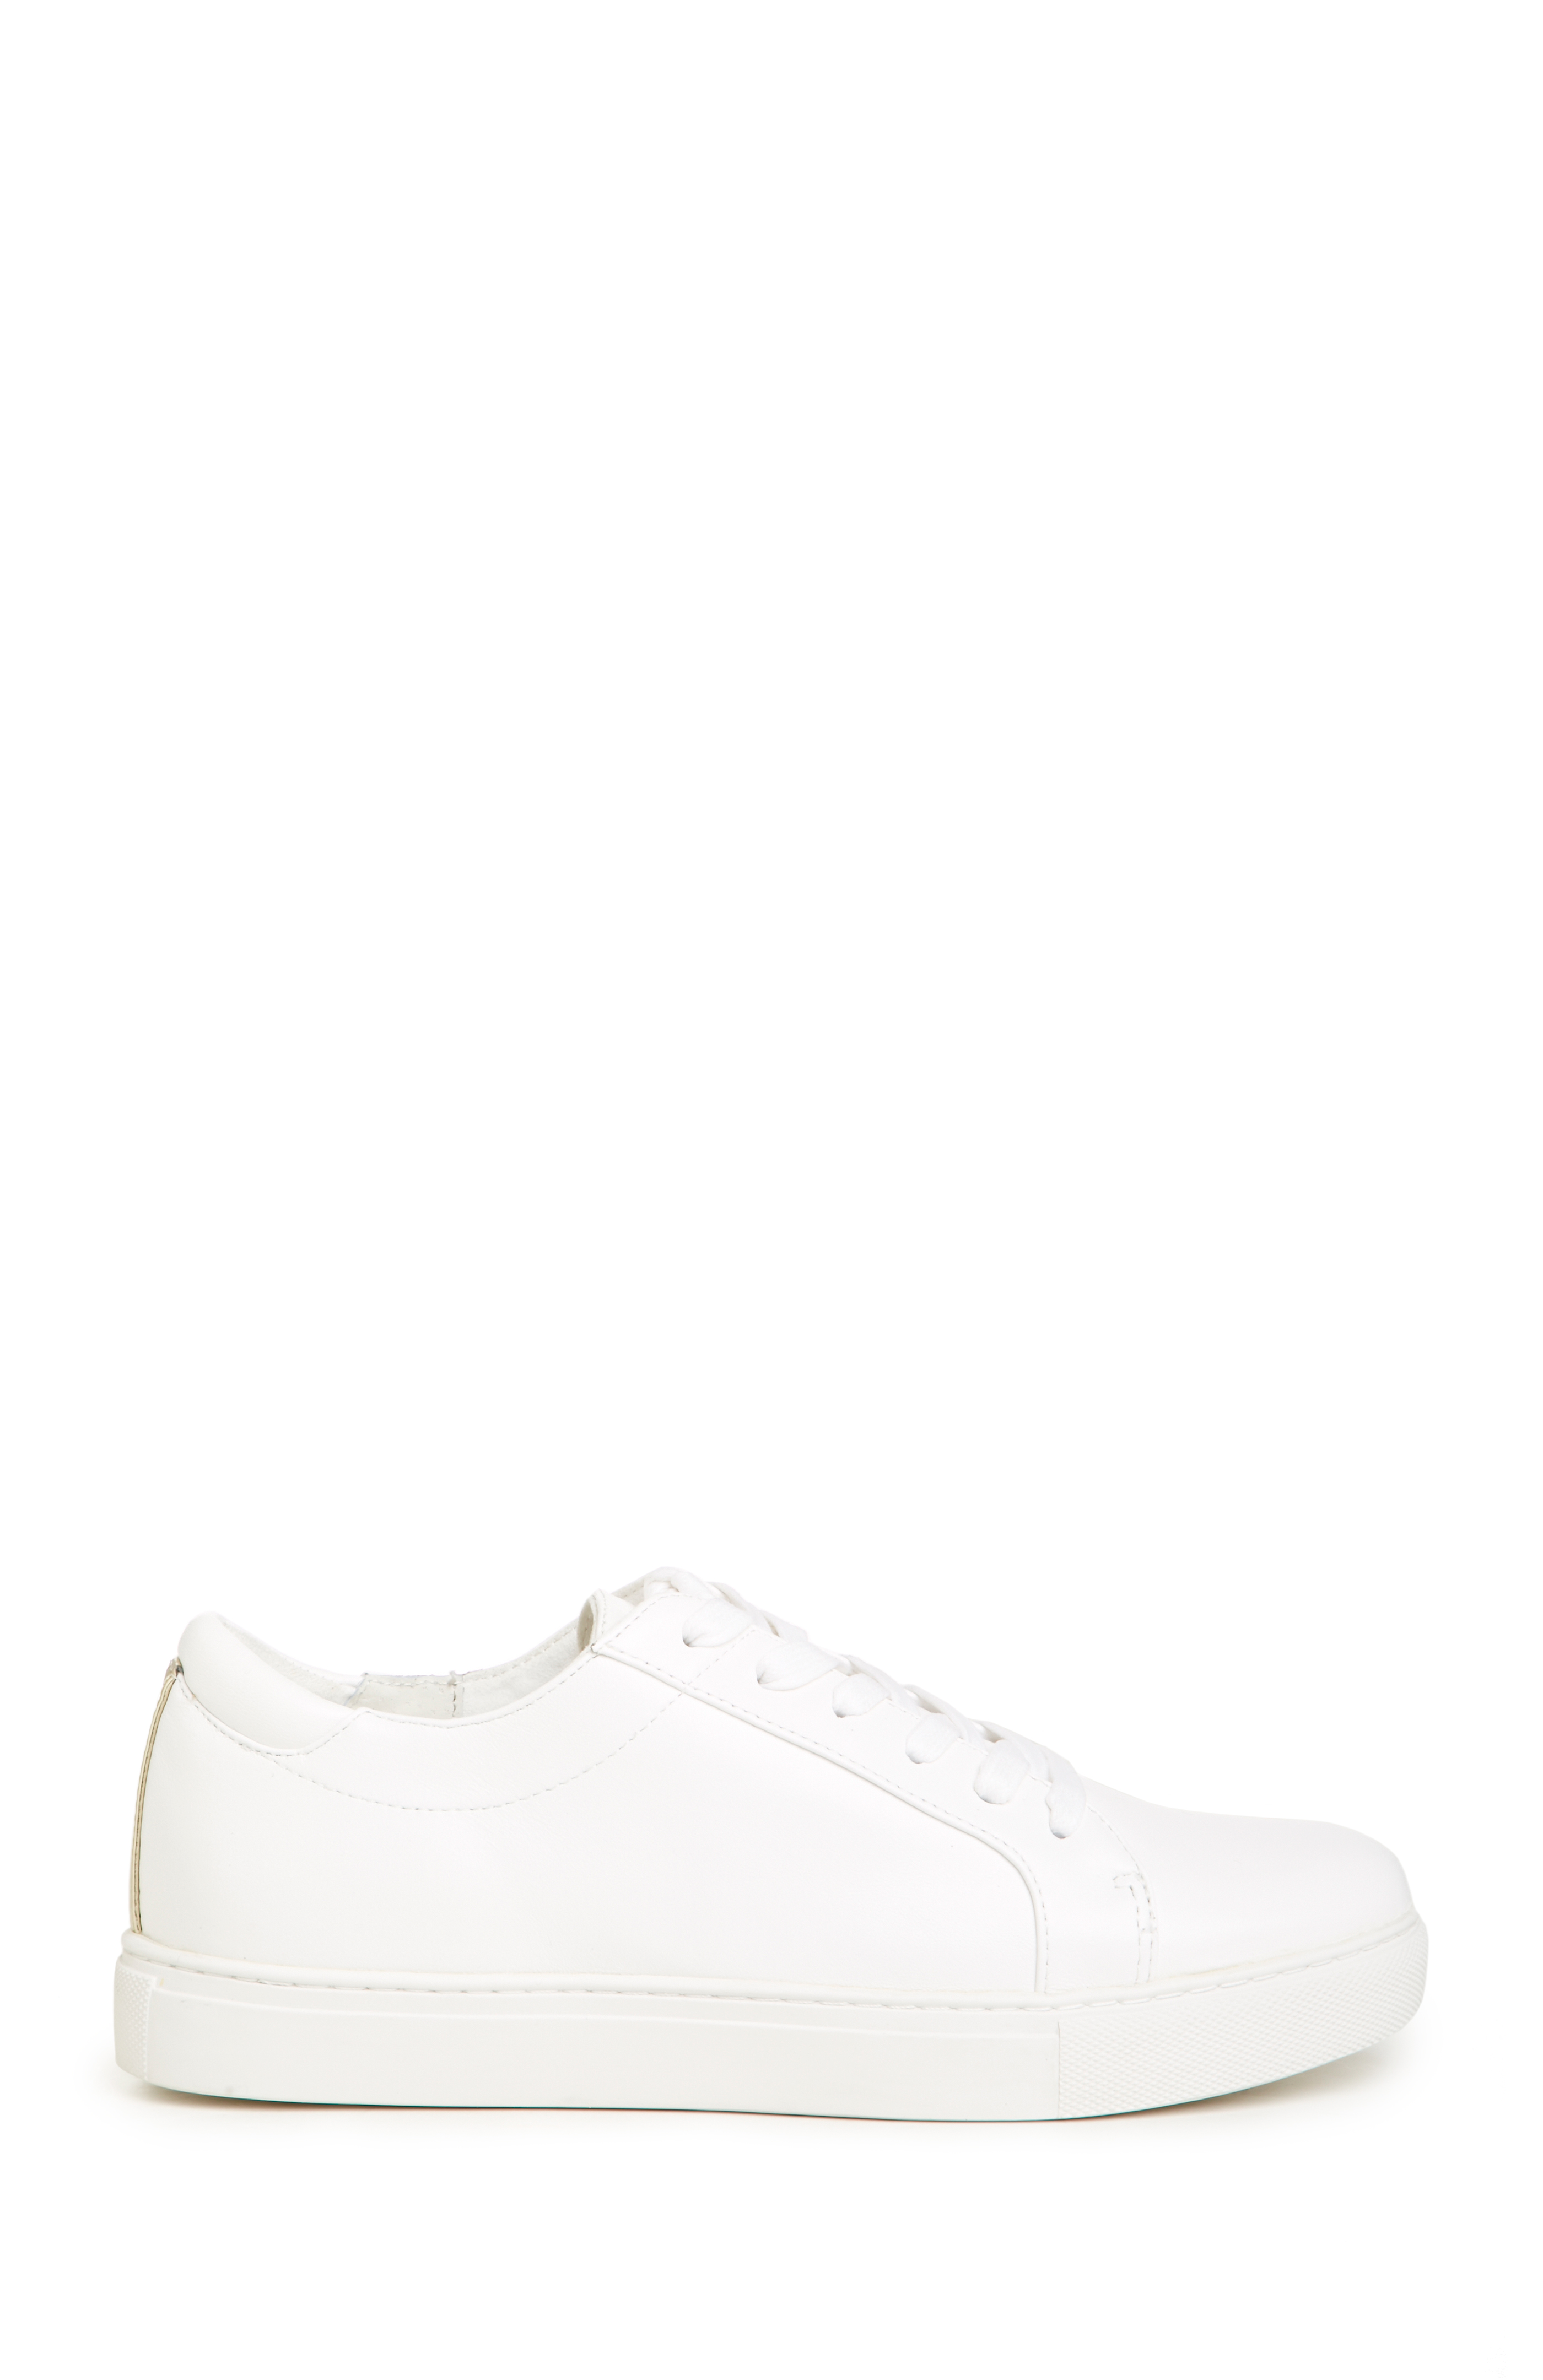 Kenneth Cole Kam Leather Sneakers in White | DAILYLOOK